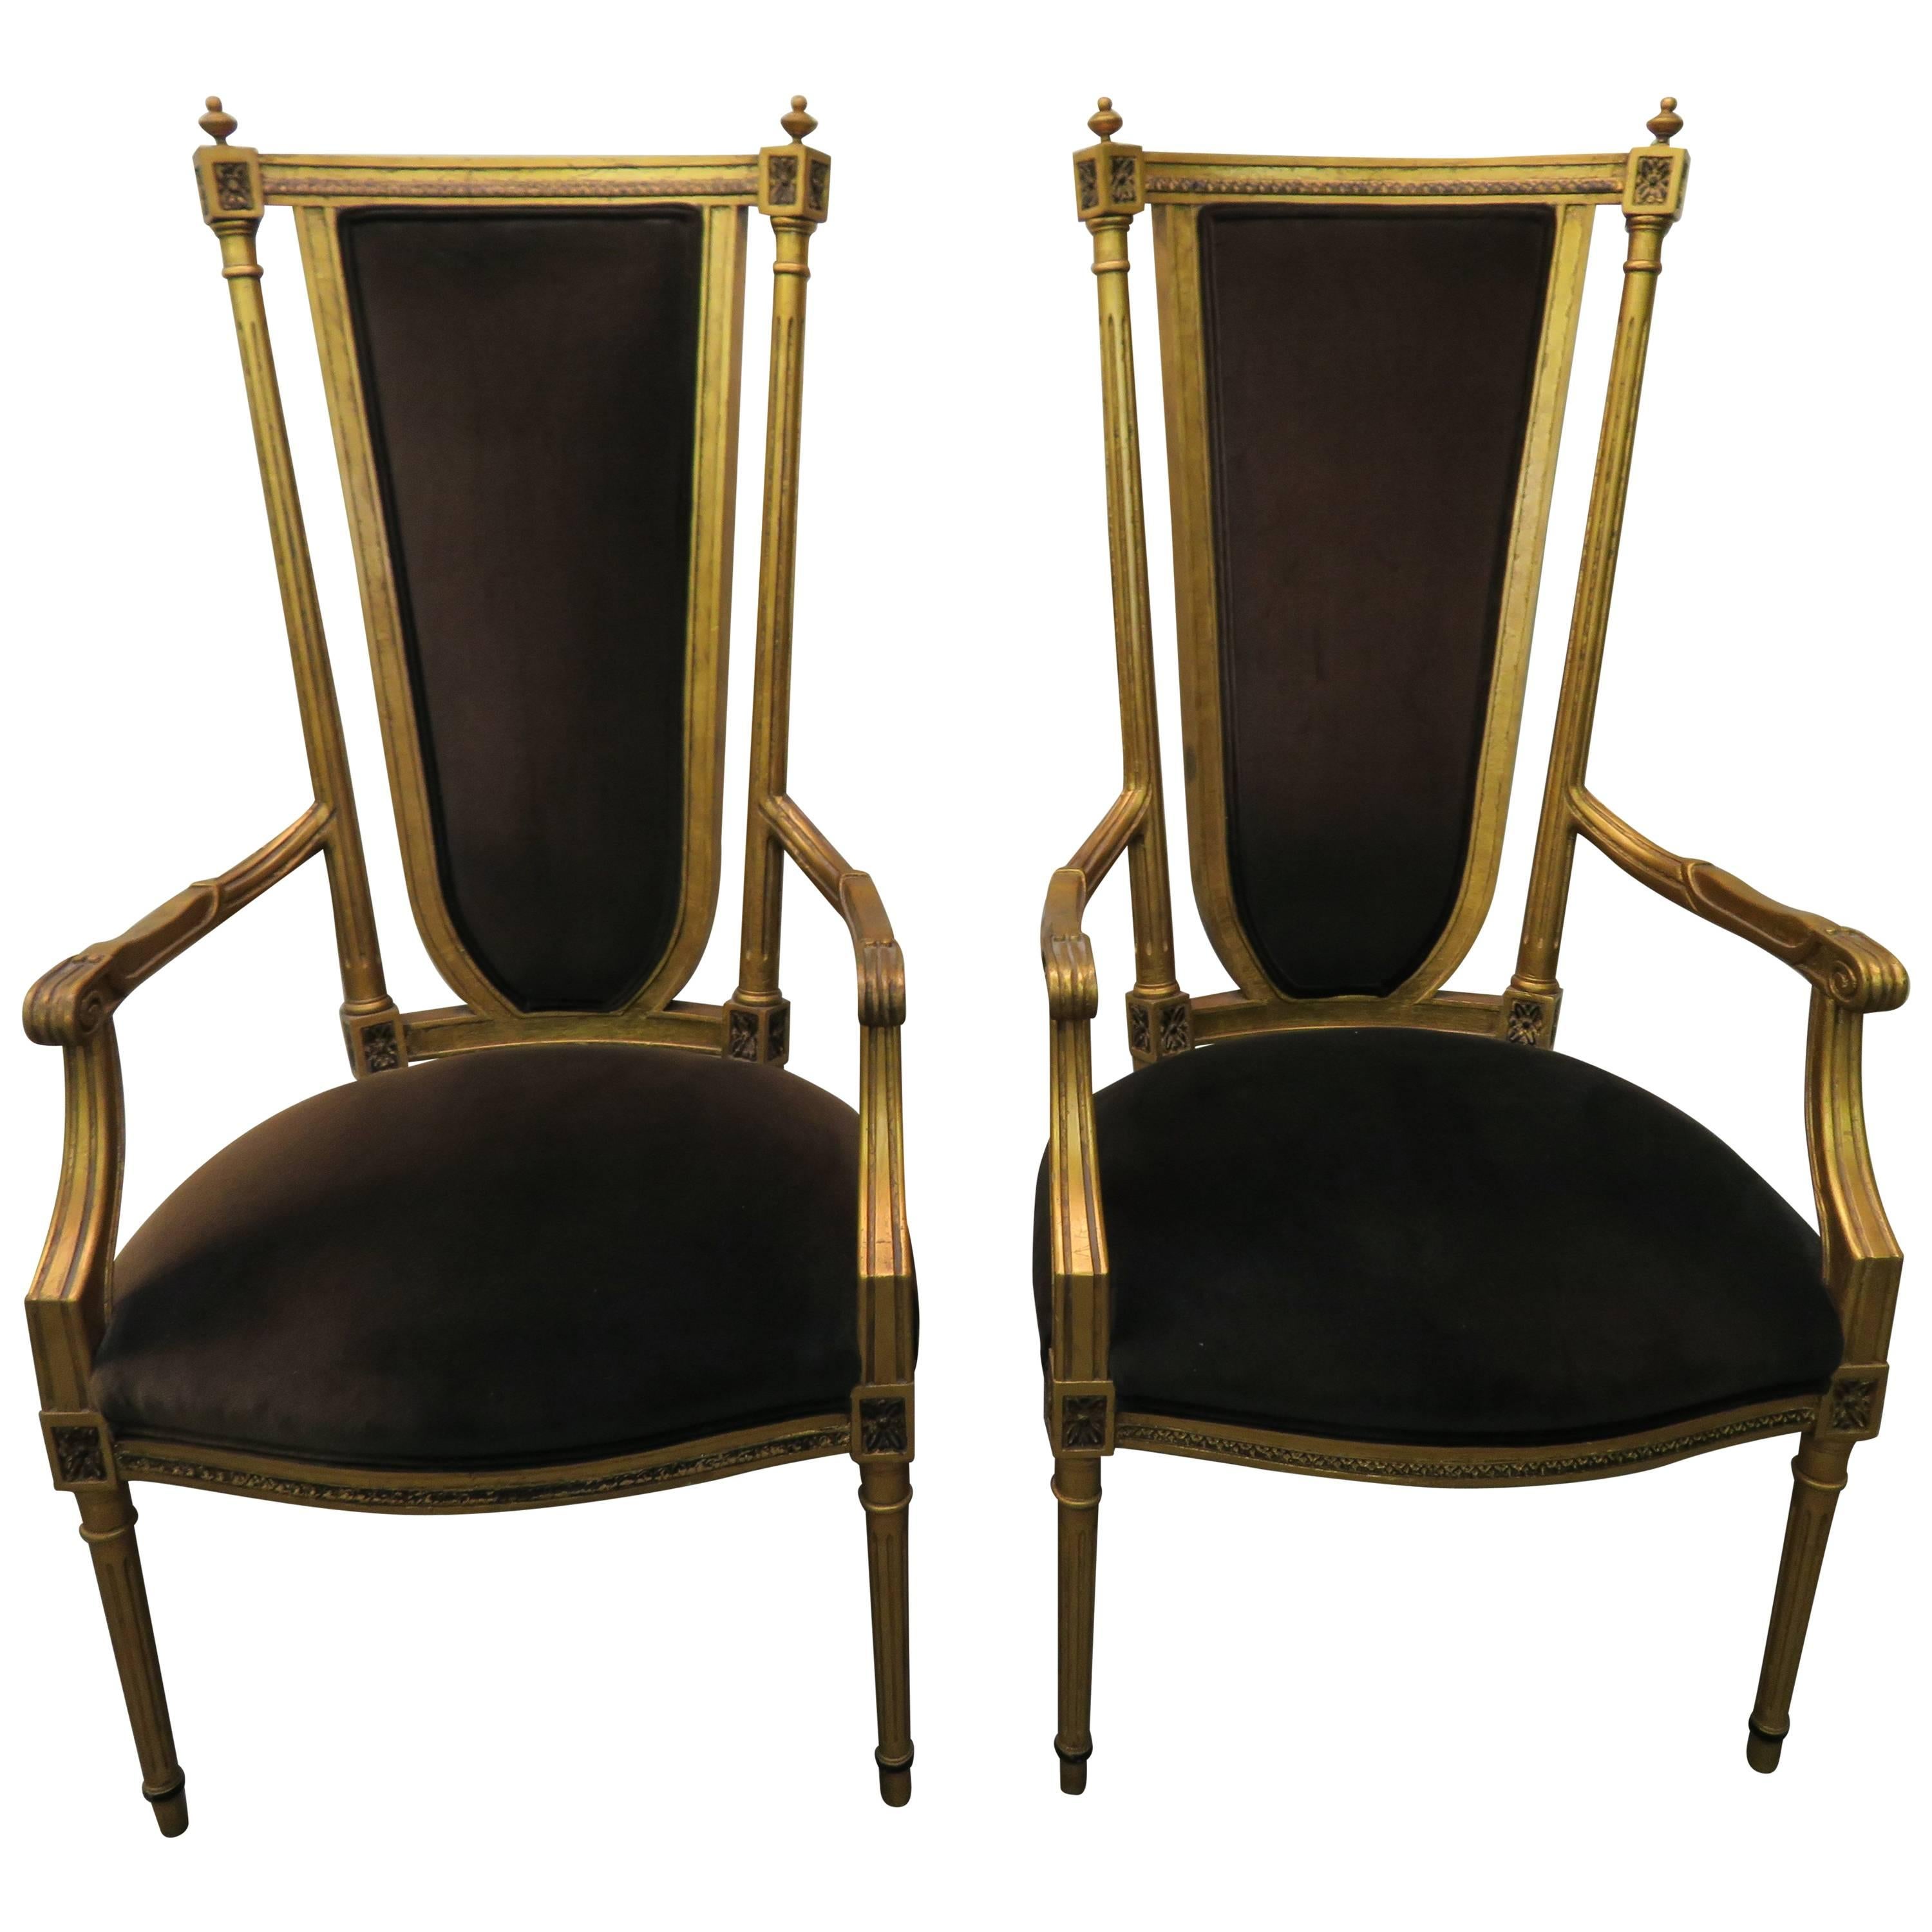 Pair of Hollywood Regency Maison Jansen Style Neoclassical Gilded Gold Armchairs